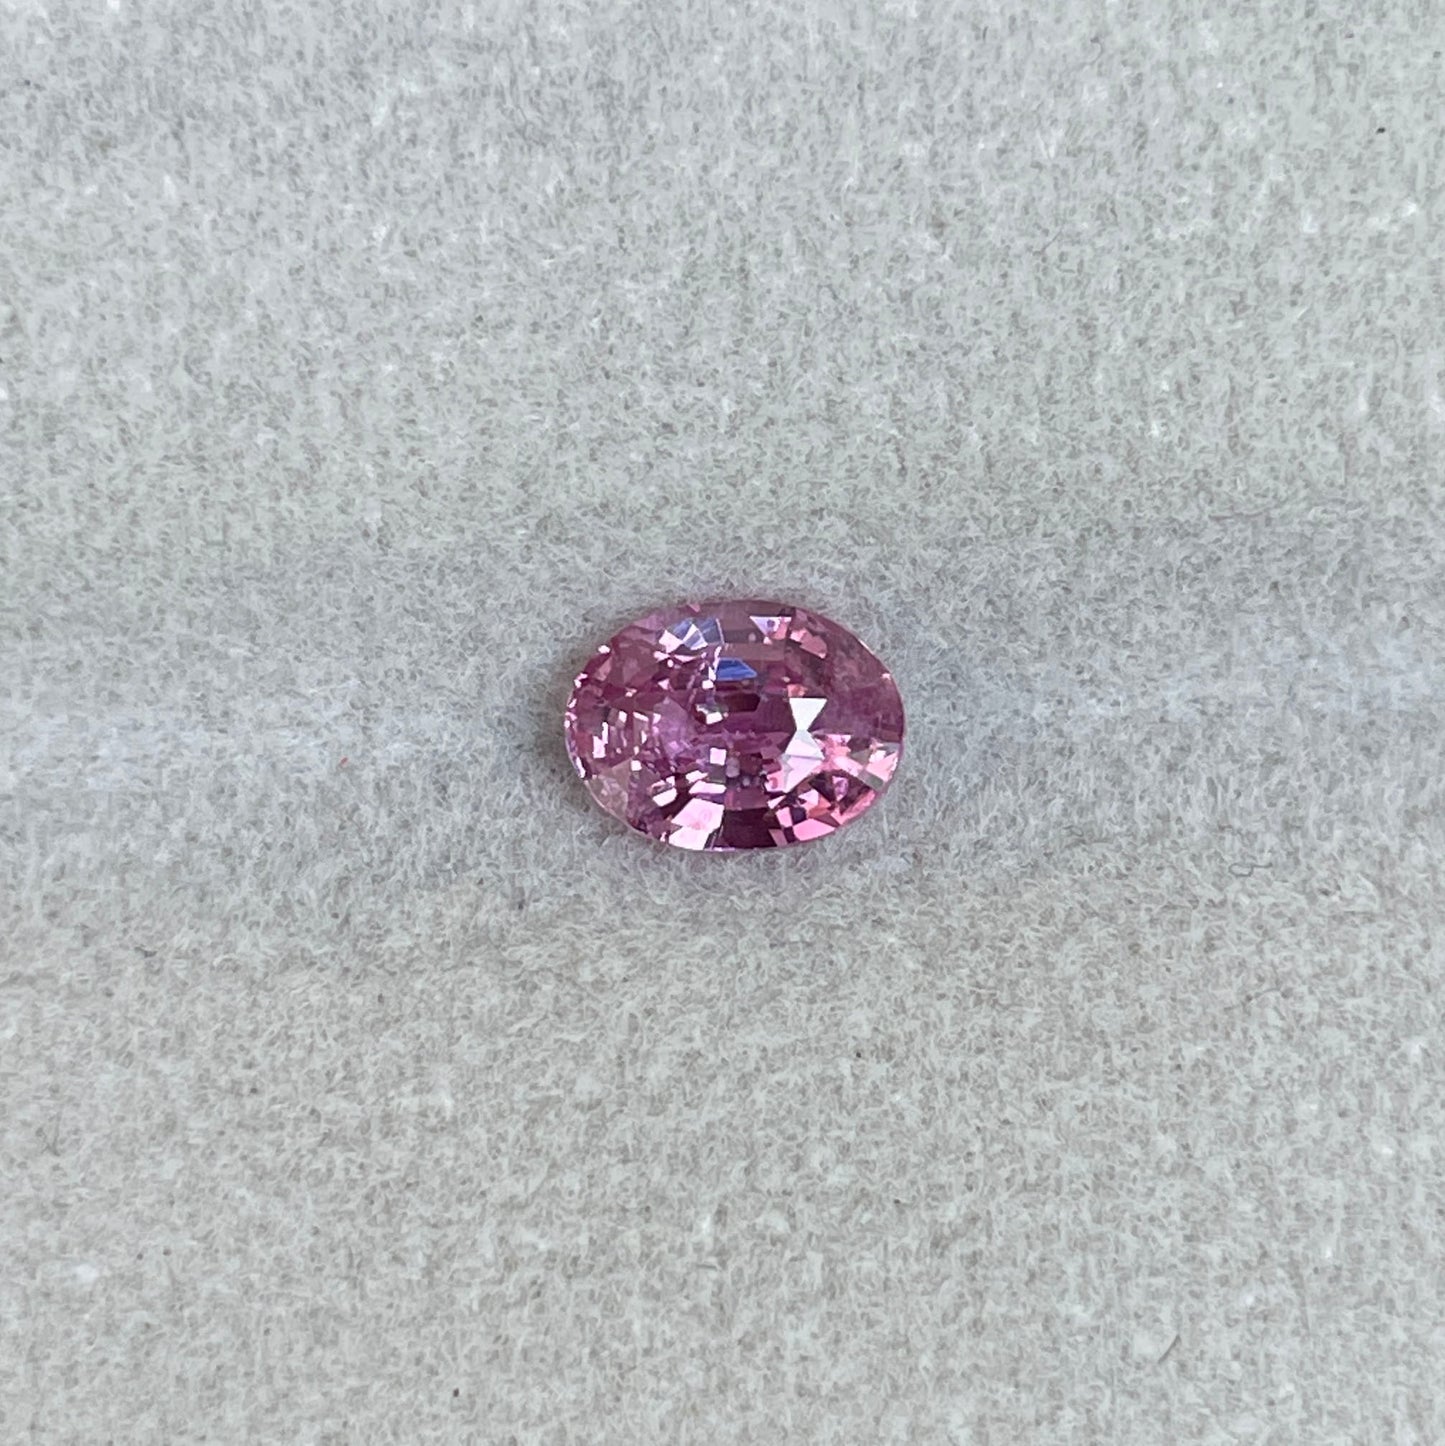 1.10 crt Pink Sapphire, Las Coloradas Pink Sapphire Oval Cut, Loose Stone, Faceted natural earth mined gemstone